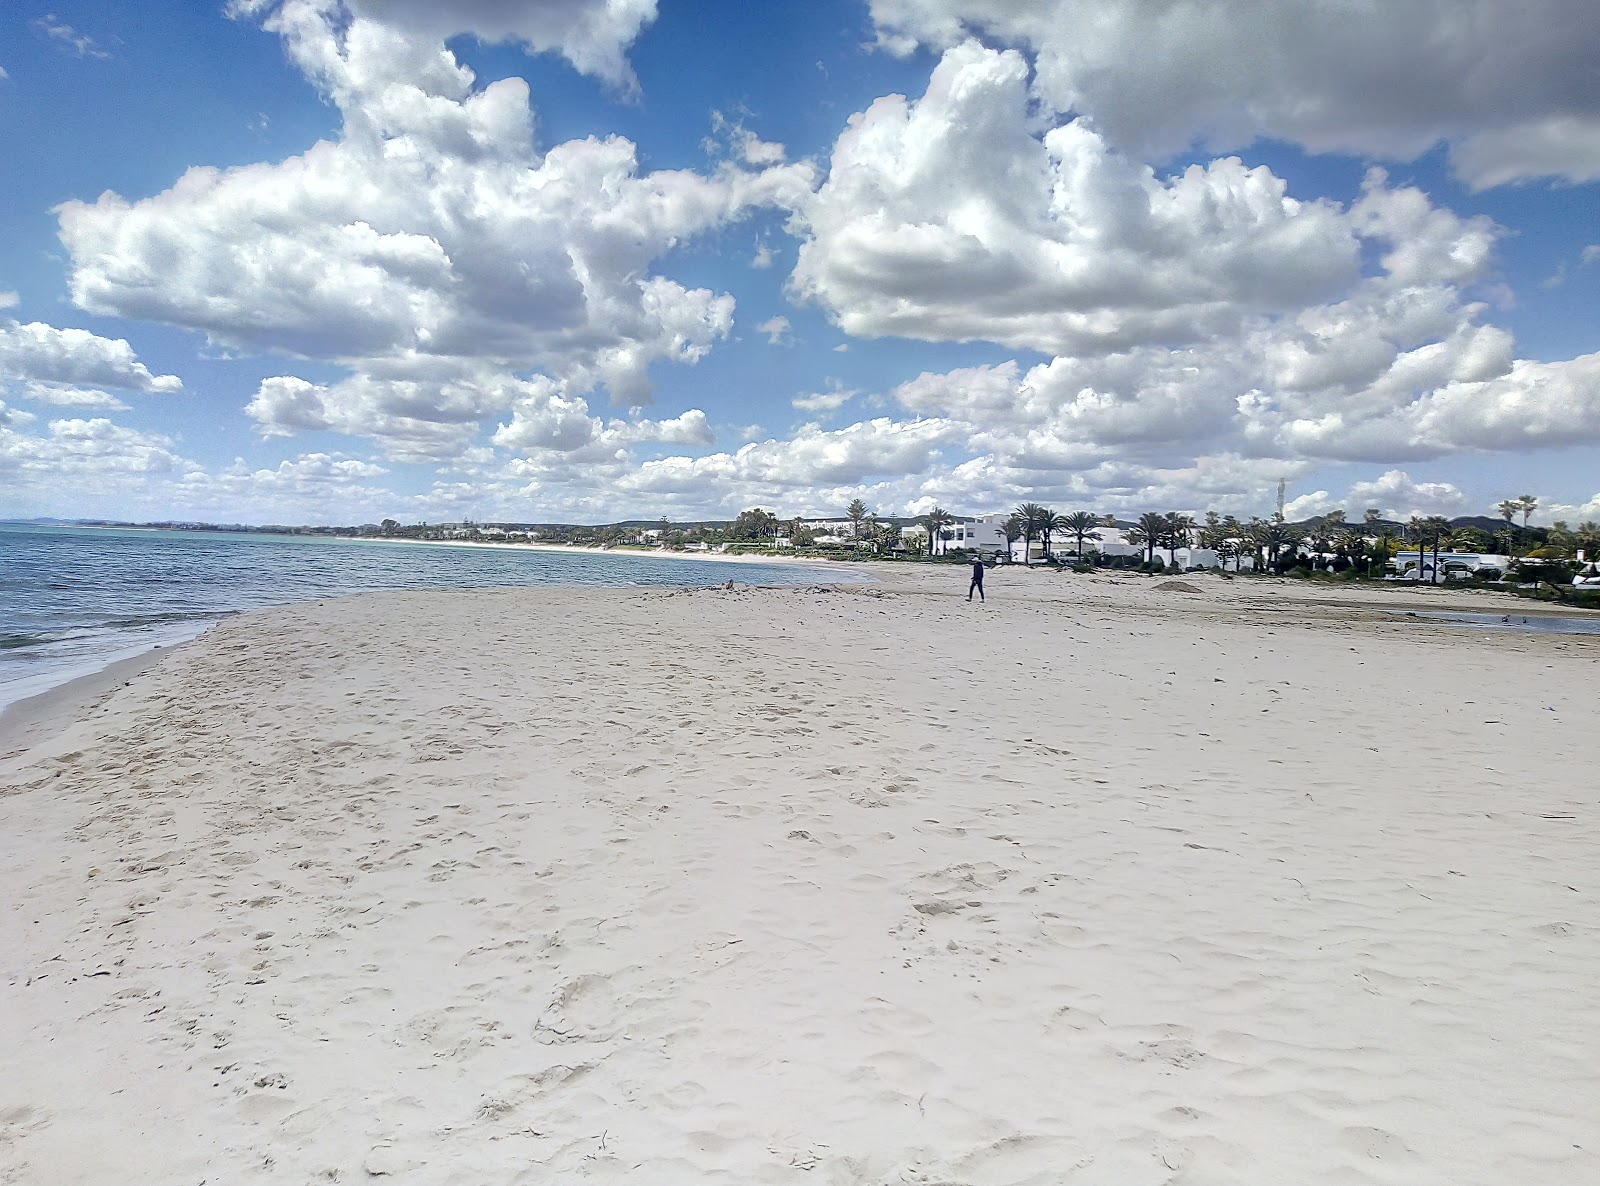 Photo of Plage de Hammamet with partly clean level of cleanliness